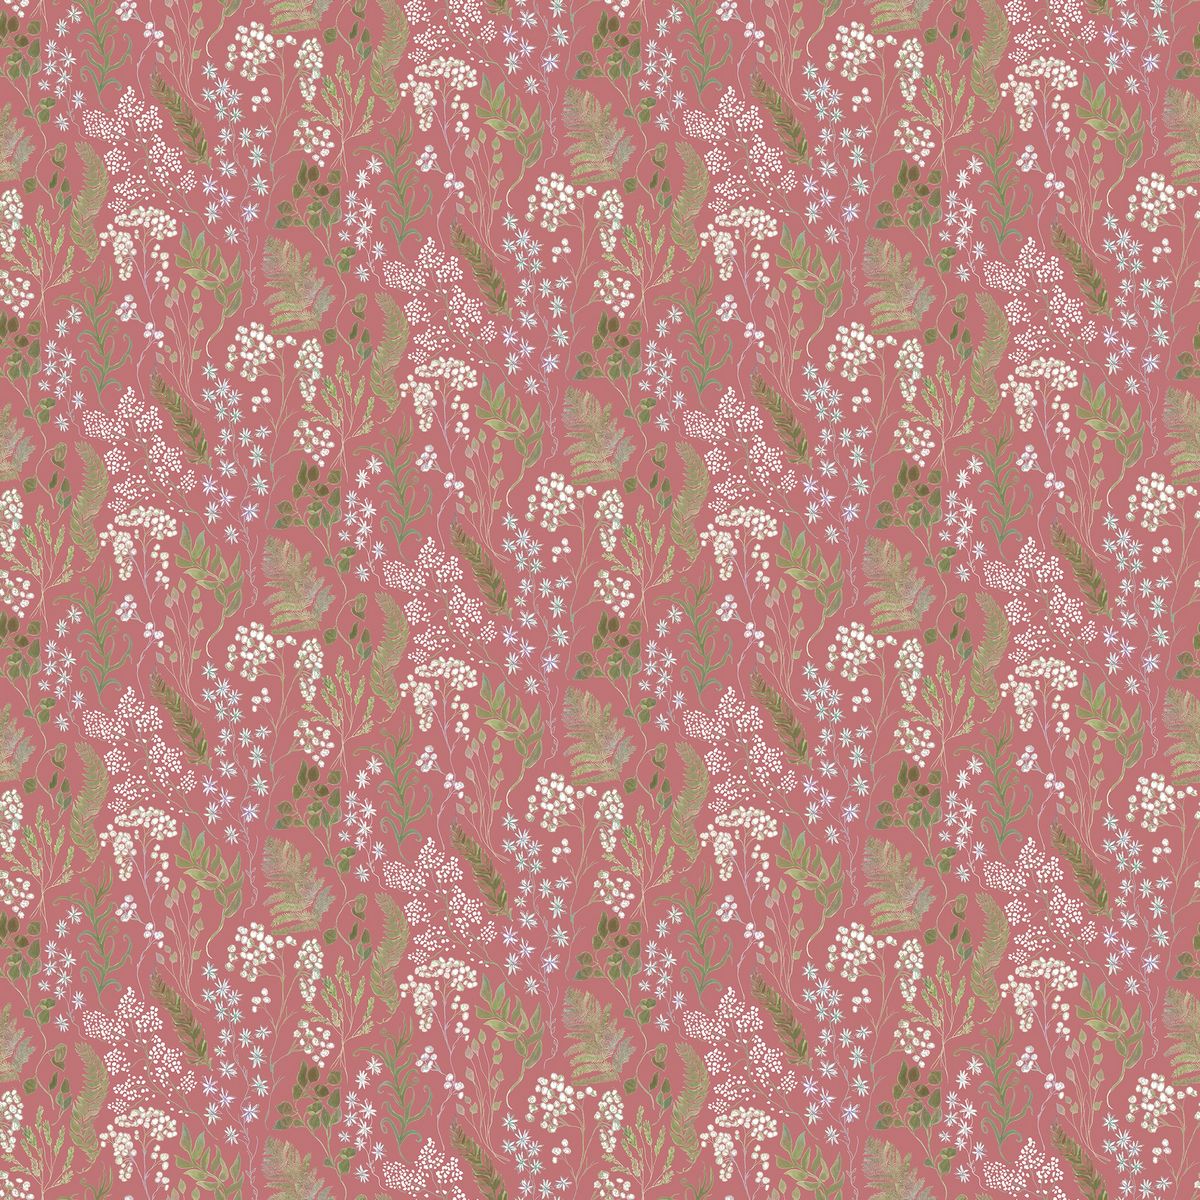 Aileana Rose Fabric by Voyage Maison